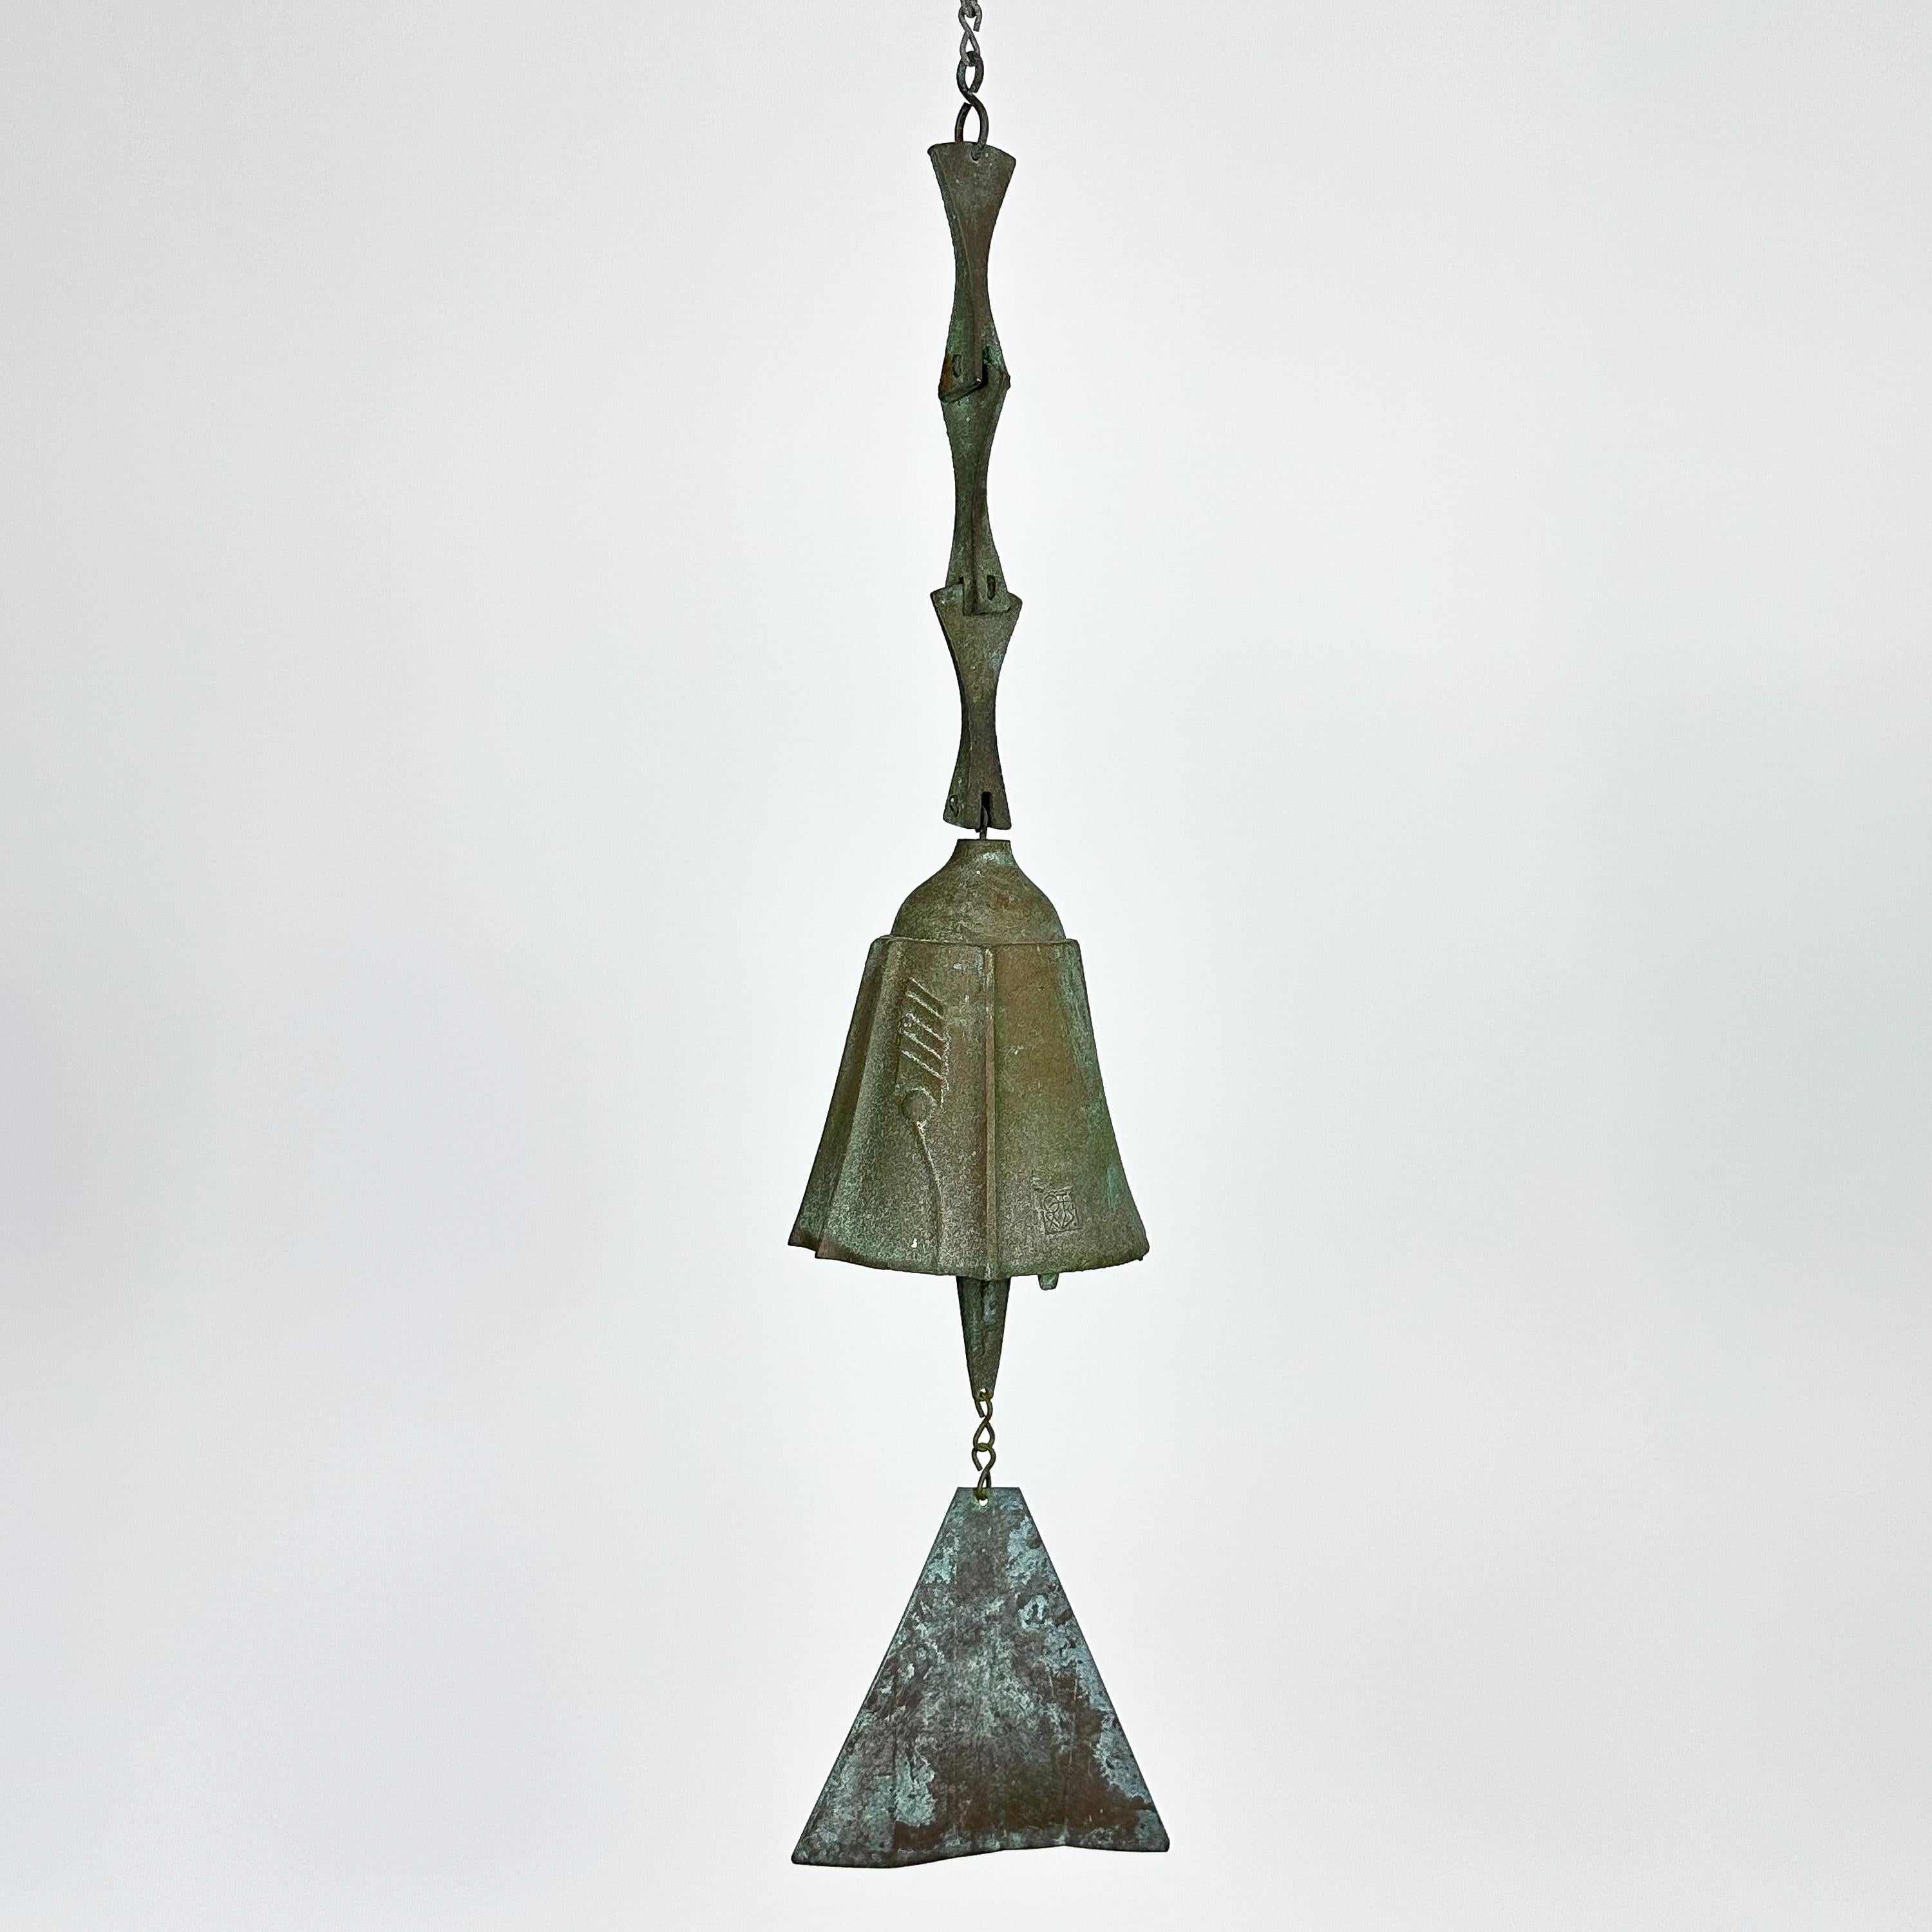 Late 20th Century Set of 3 Bronze Bells / Wind Chimes by Paolo Soleri for Arcosanti